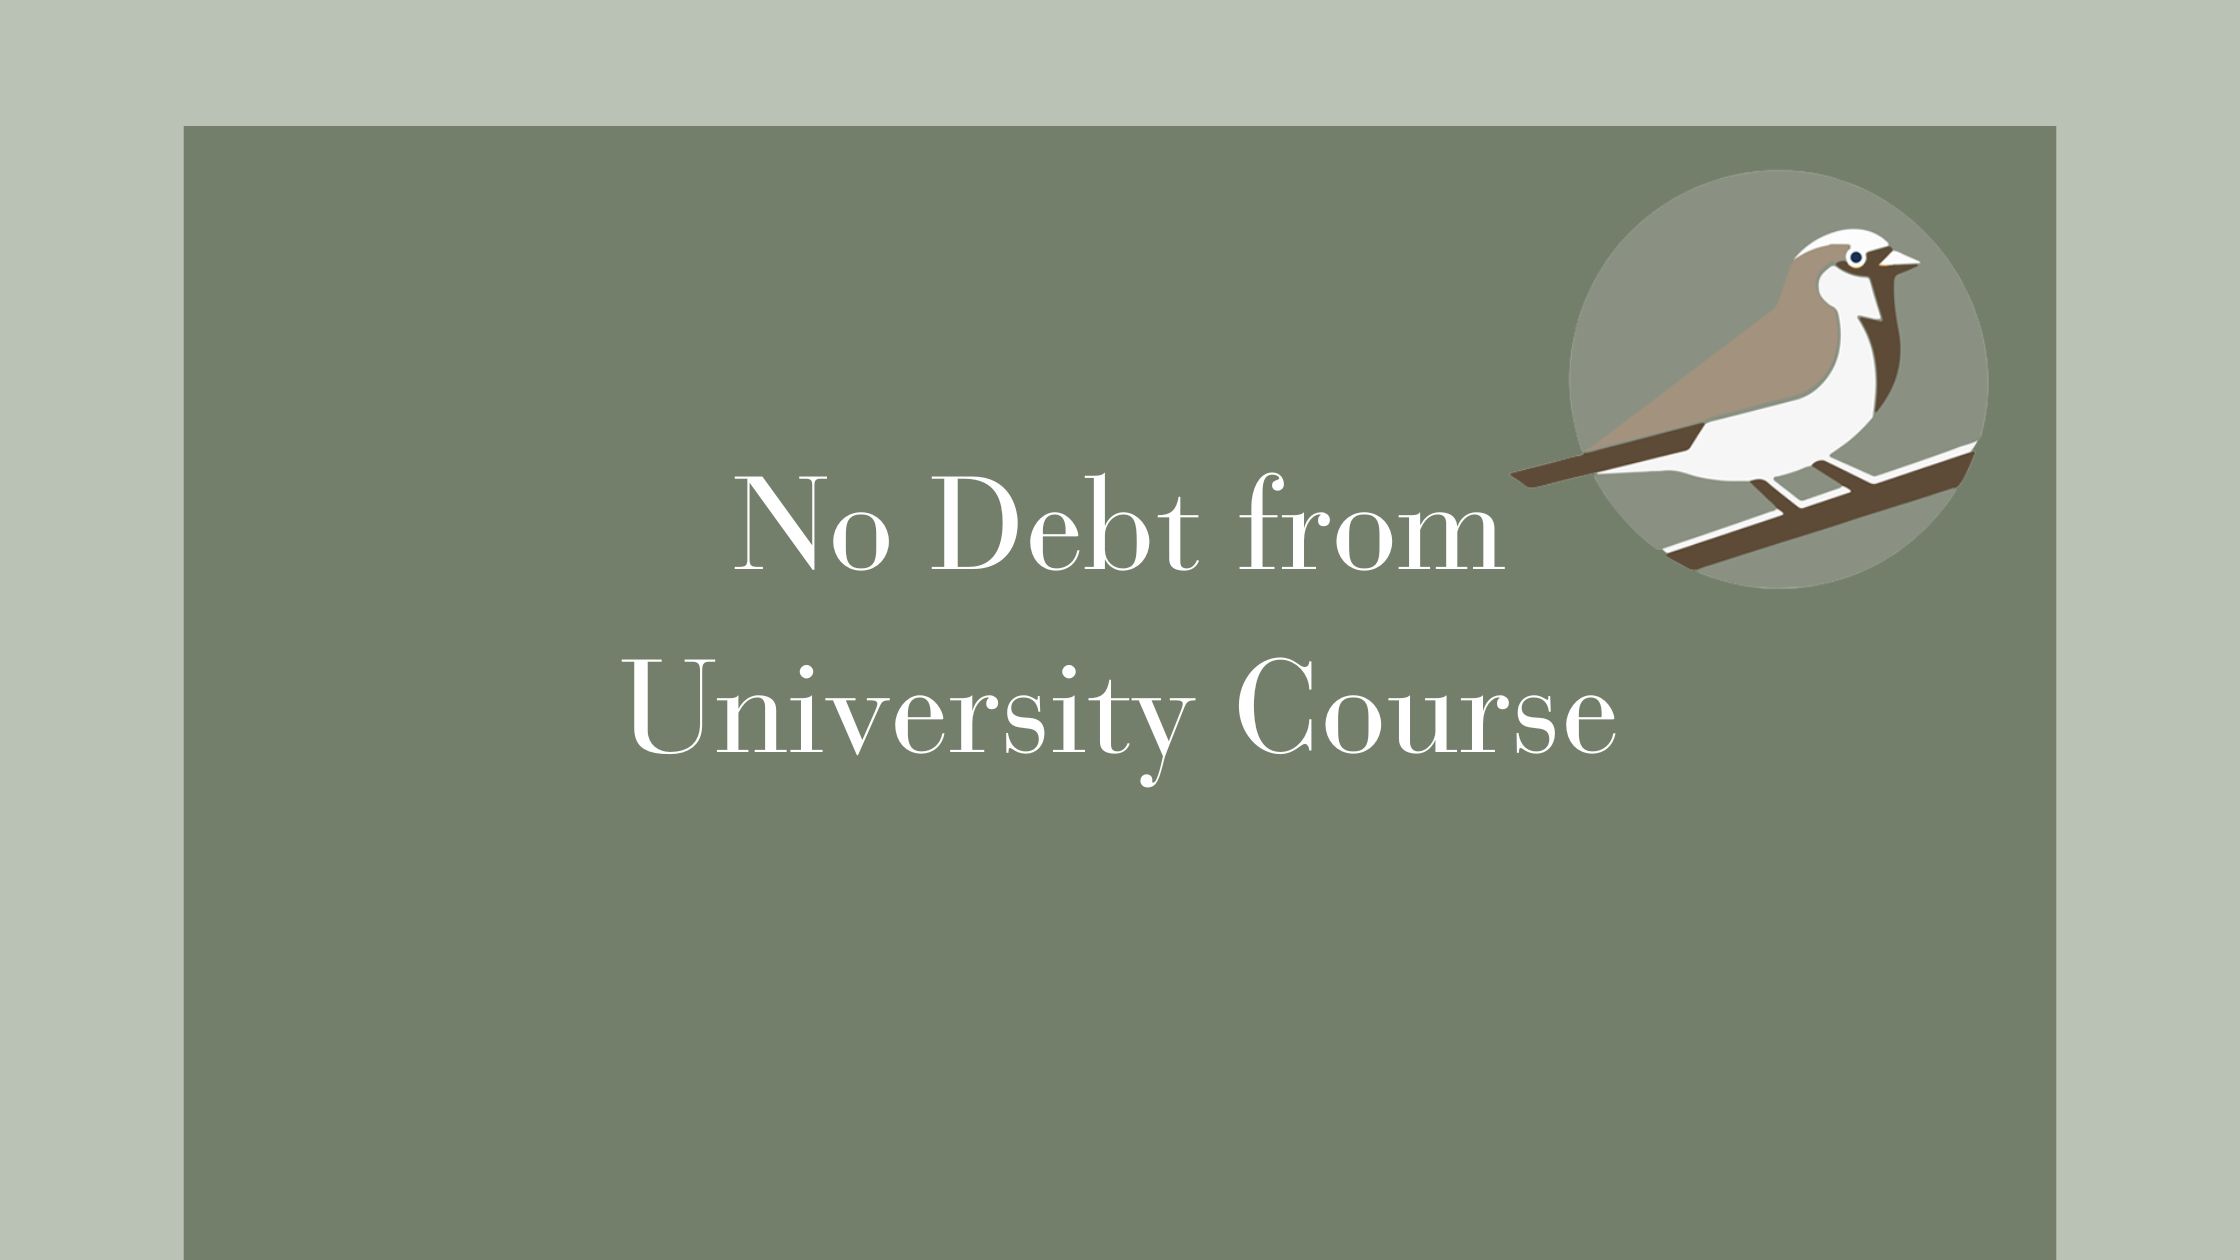 No debt from university course